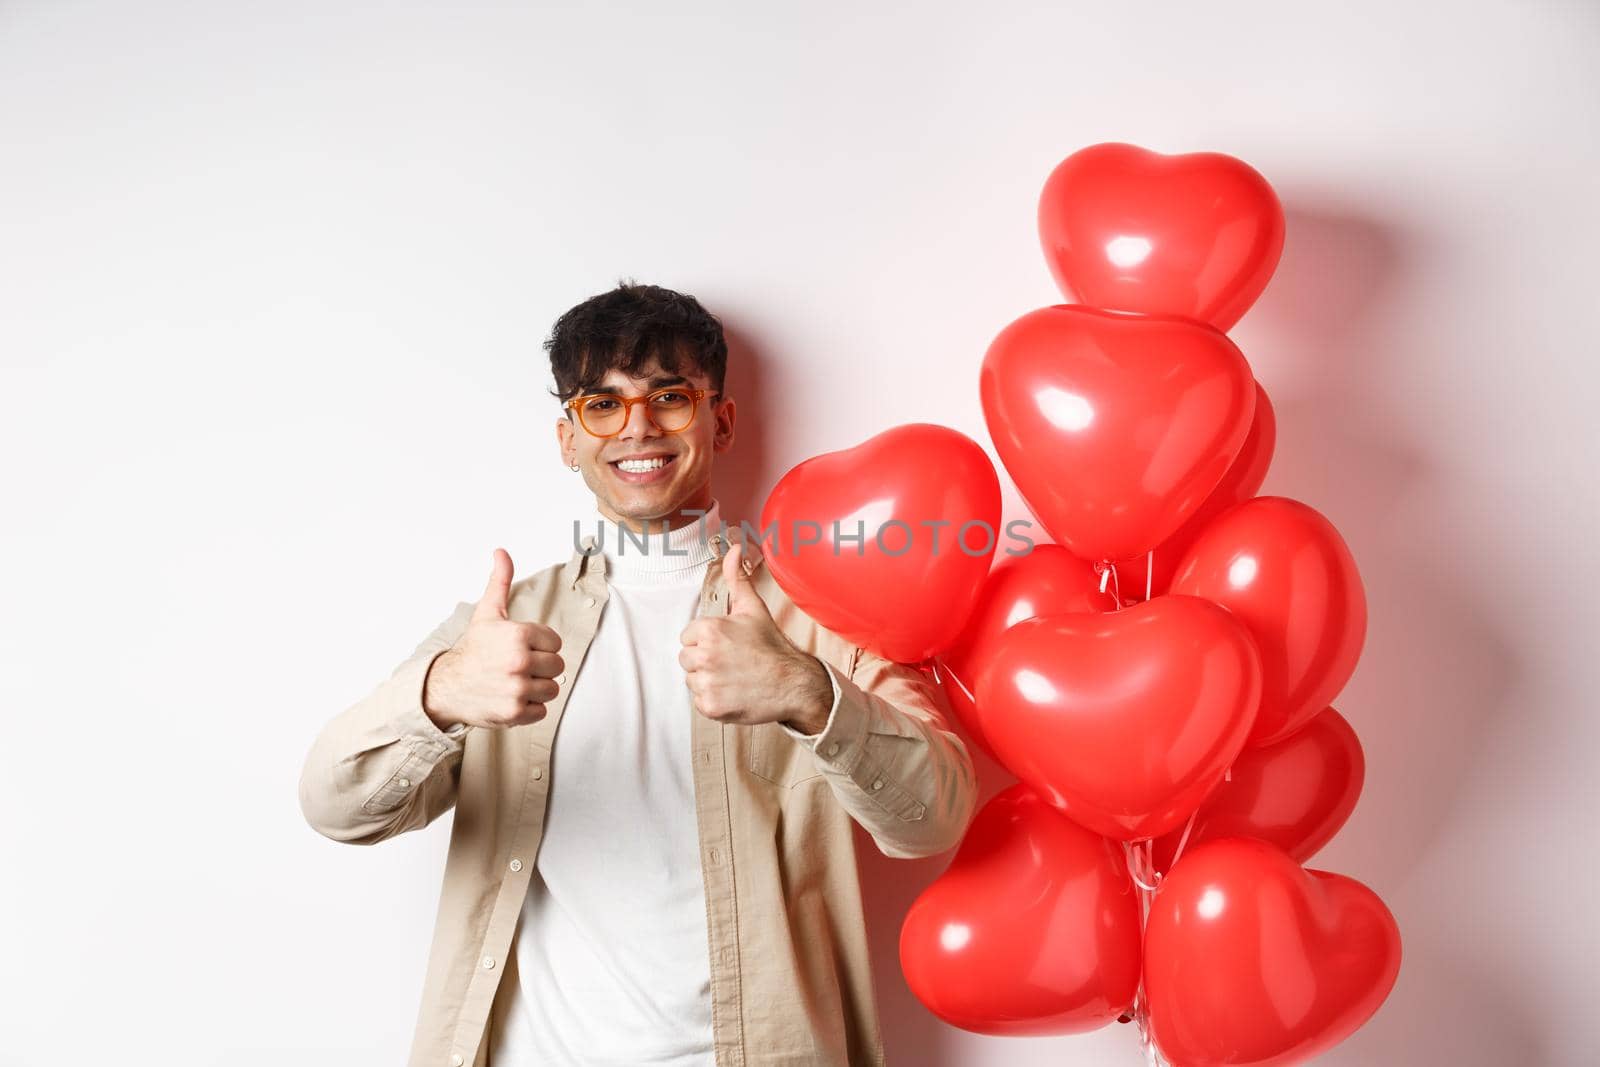 Valentines day and romance concept. Stylish modern man in sunglasses showing thumbs up while standing near heart balloons, saying yes, enjoy date with lover.